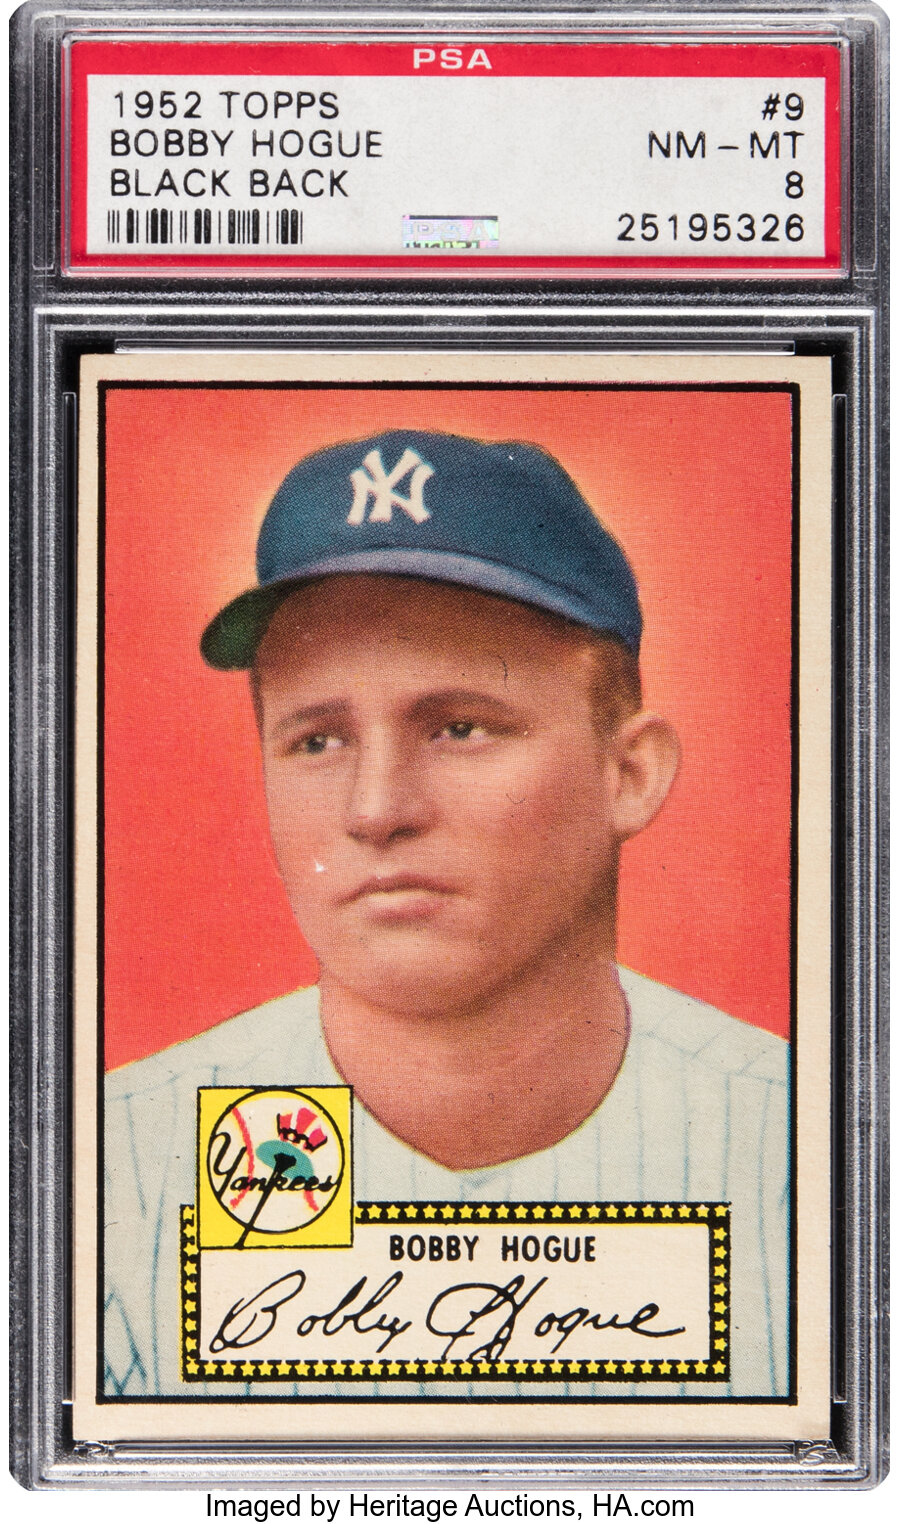 1952 Topps Bobby Hogue (Black Back) Rookie #9 PSA NM-MT 8 - Only One Higher!